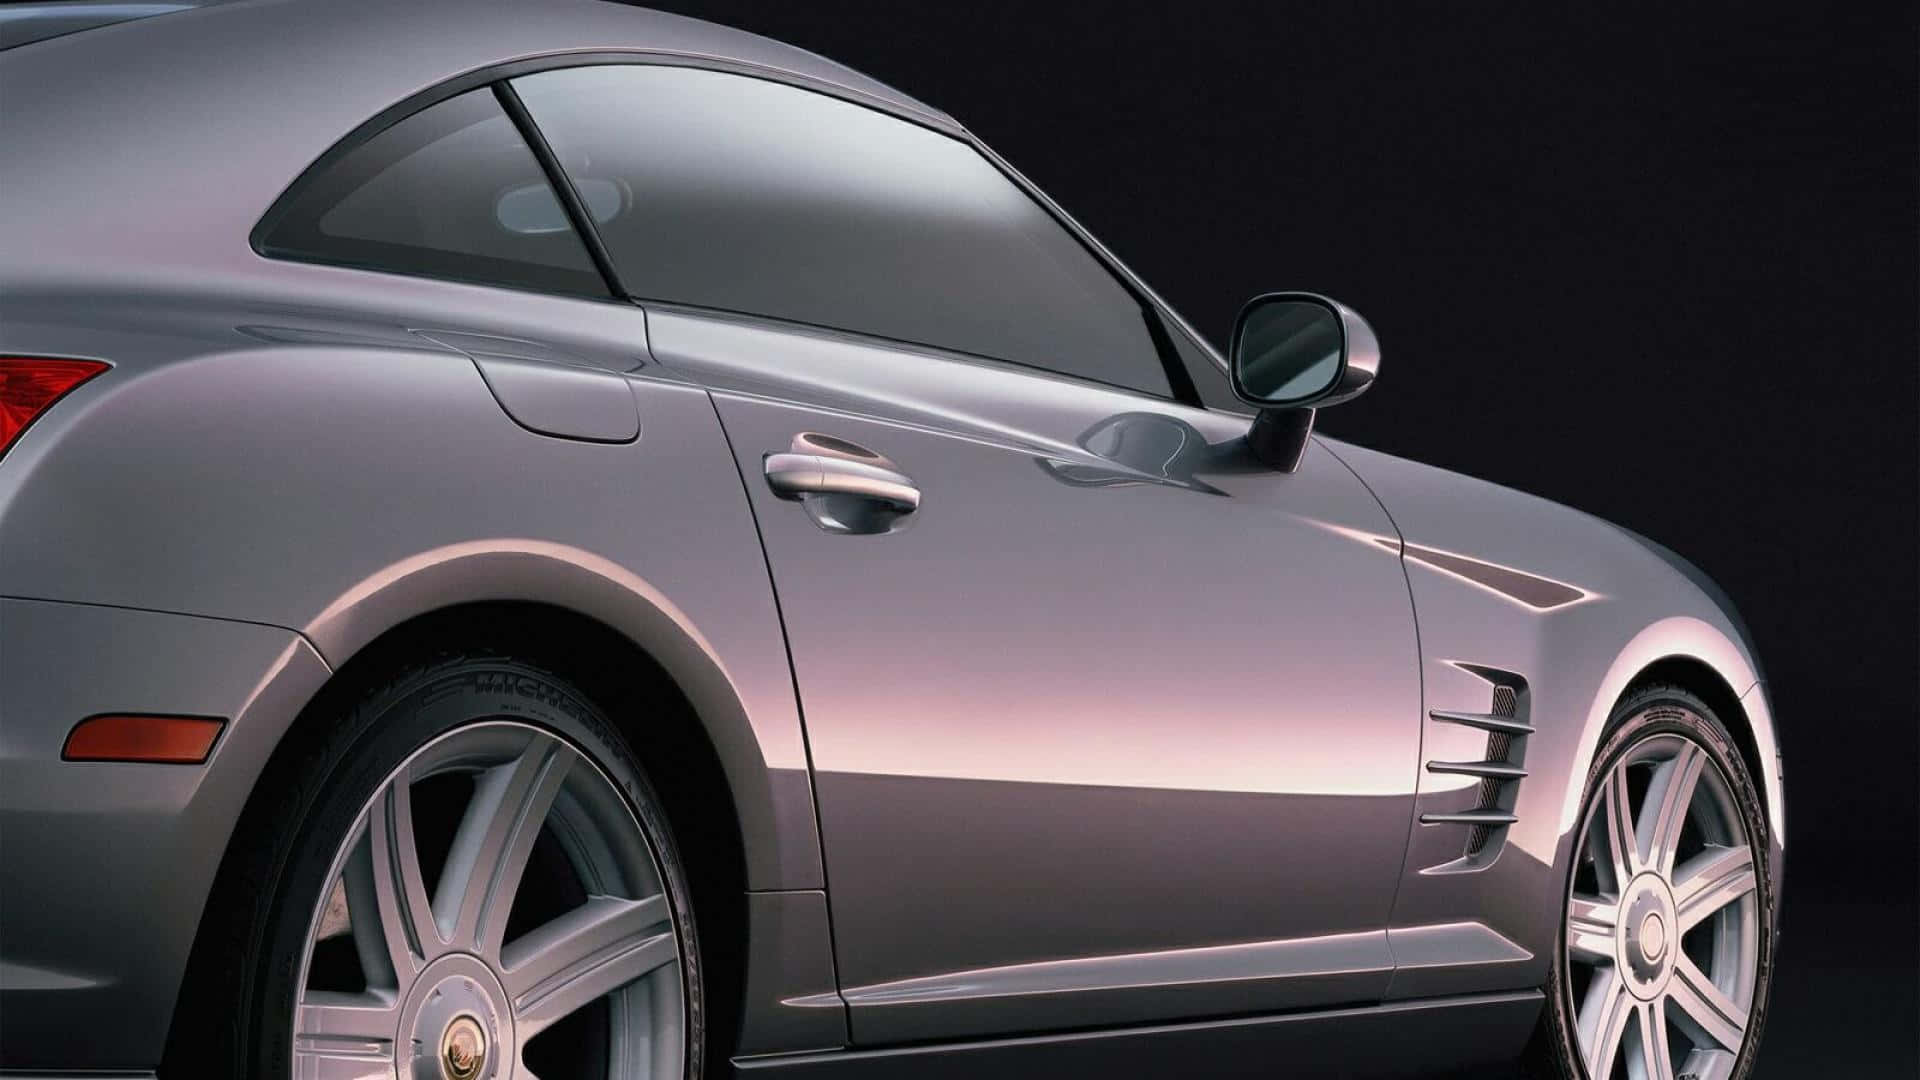 2004 Chrysler Crossfire: A Sporty and Sleek Coupe Wallpaper